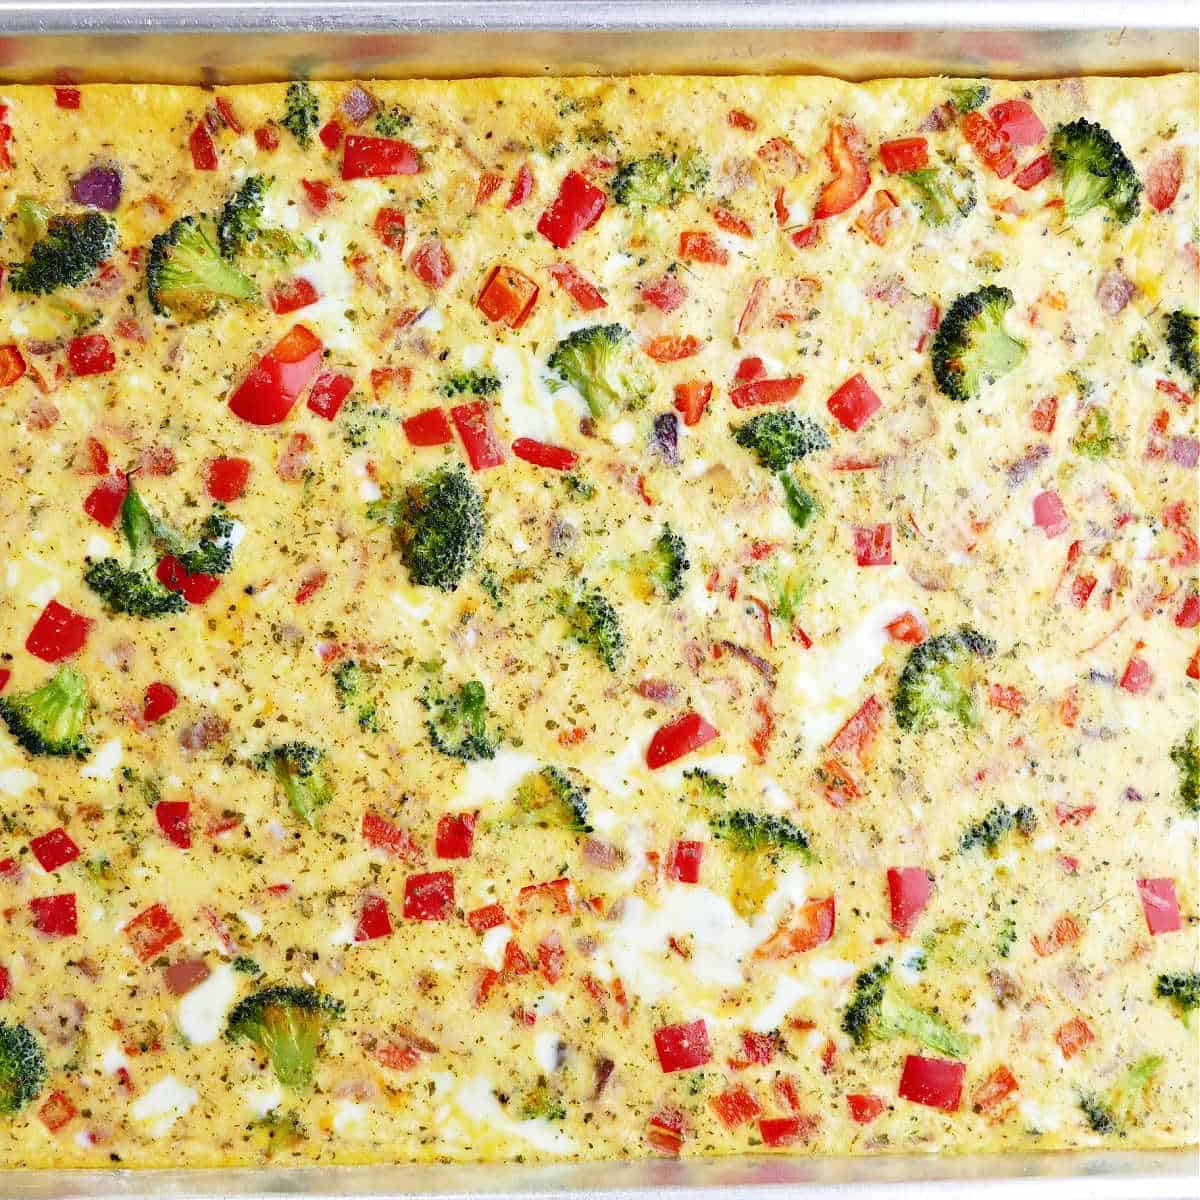 baked sheet pan omelet after coming out of the oven